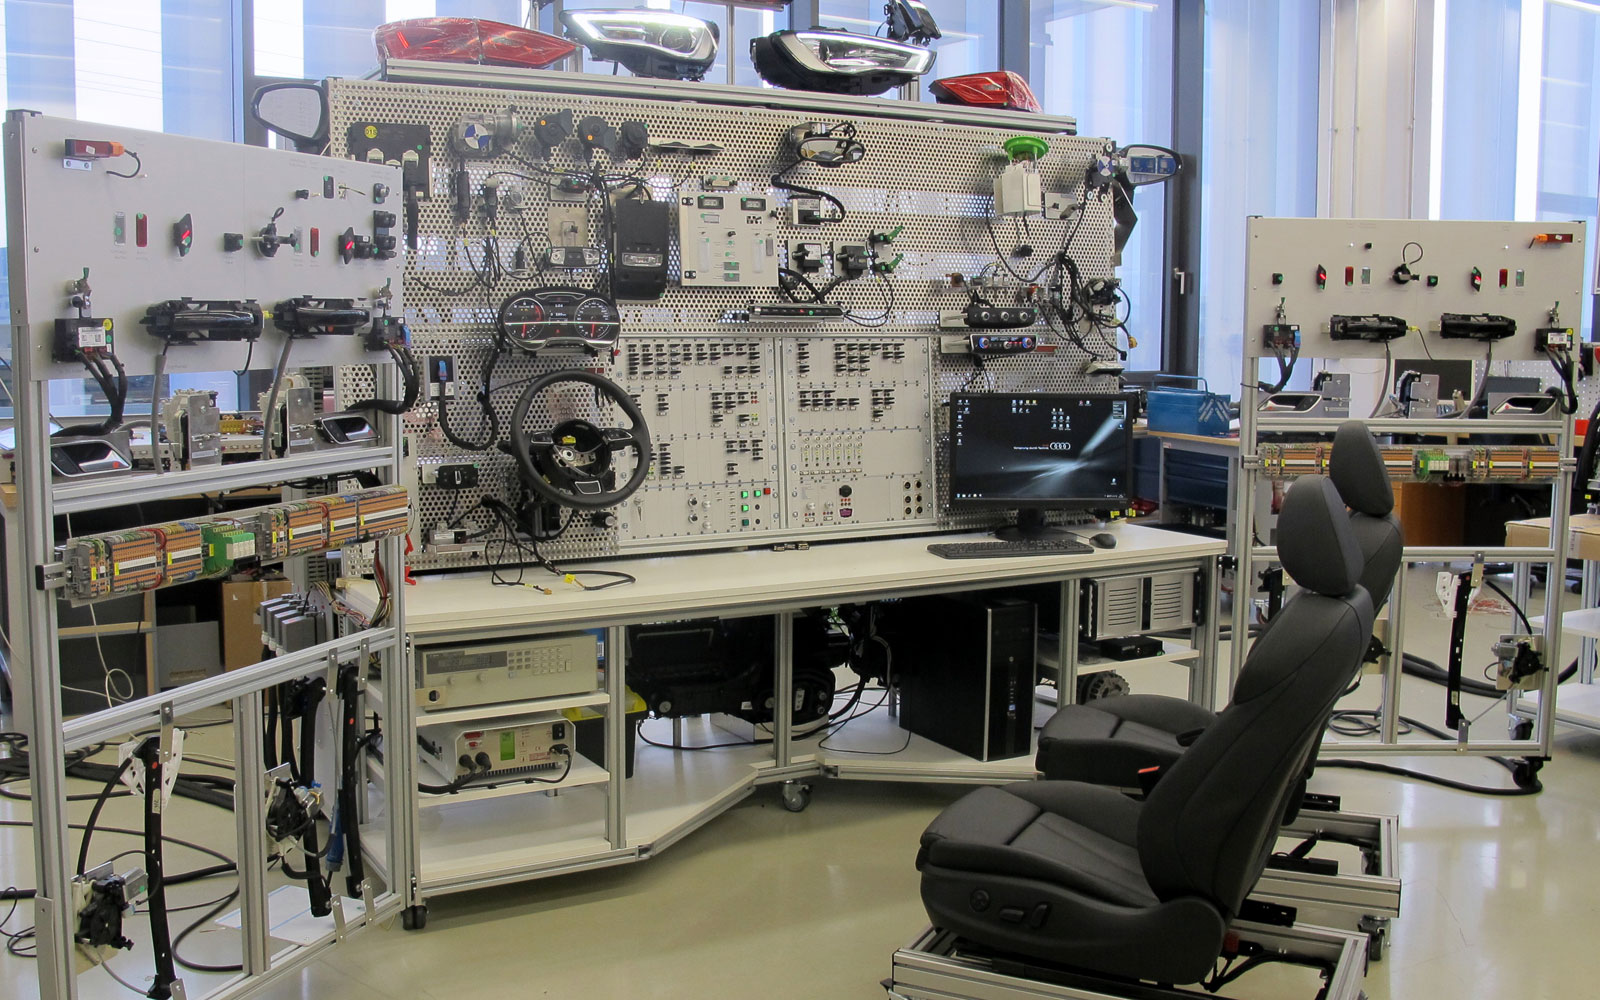  Reproduction of a complete vehicle electrical system in the test laboratory: wide-range current measurements and ECU tests (source: BFFT Gesellschaft für Fahrzeugtechnik mbH)